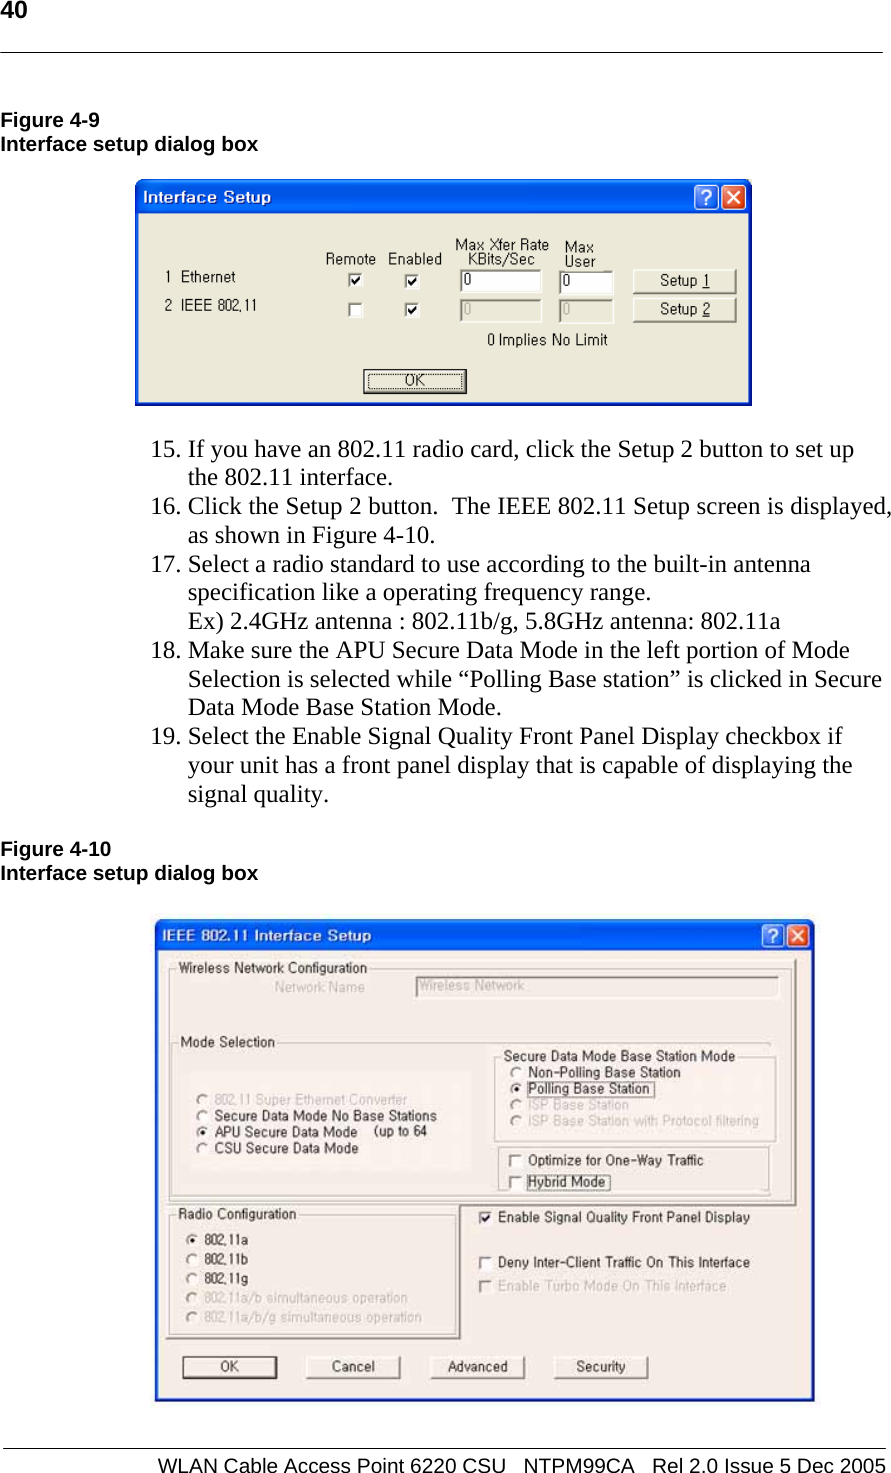   40  WLAN Cable Access Point 6220 CSU   NTPM99CA   Rel 2.0 Issue 5 Dec 2005 Figure 4-9 Interface setup dialog box    15. If you have an 802.11 radio card, click the Setup 2 button to set up the 802.11 interface. 16. Click the Setup 2 button.  The IEEE 802.11 Setup screen is displayed, as shown in Figure 4-10.  17. Select a radio standard to use according to the built-in antenna specification like a operating frequency range.  Ex) 2.4GHz antenna : 802.11b/g, 5.8GHz antenna: 802.11a  18. Make sure the APU Secure Data Mode in the left portion of Mode Selection is selected while “Polling Base station” is clicked in Secure Data Mode Base Station Mode. 19. Select the Enable Signal Quality Front Panel Display checkbox if your unit has a front panel display that is capable of displaying the signal quality.  Figure 4-10 Interface setup dialog box    